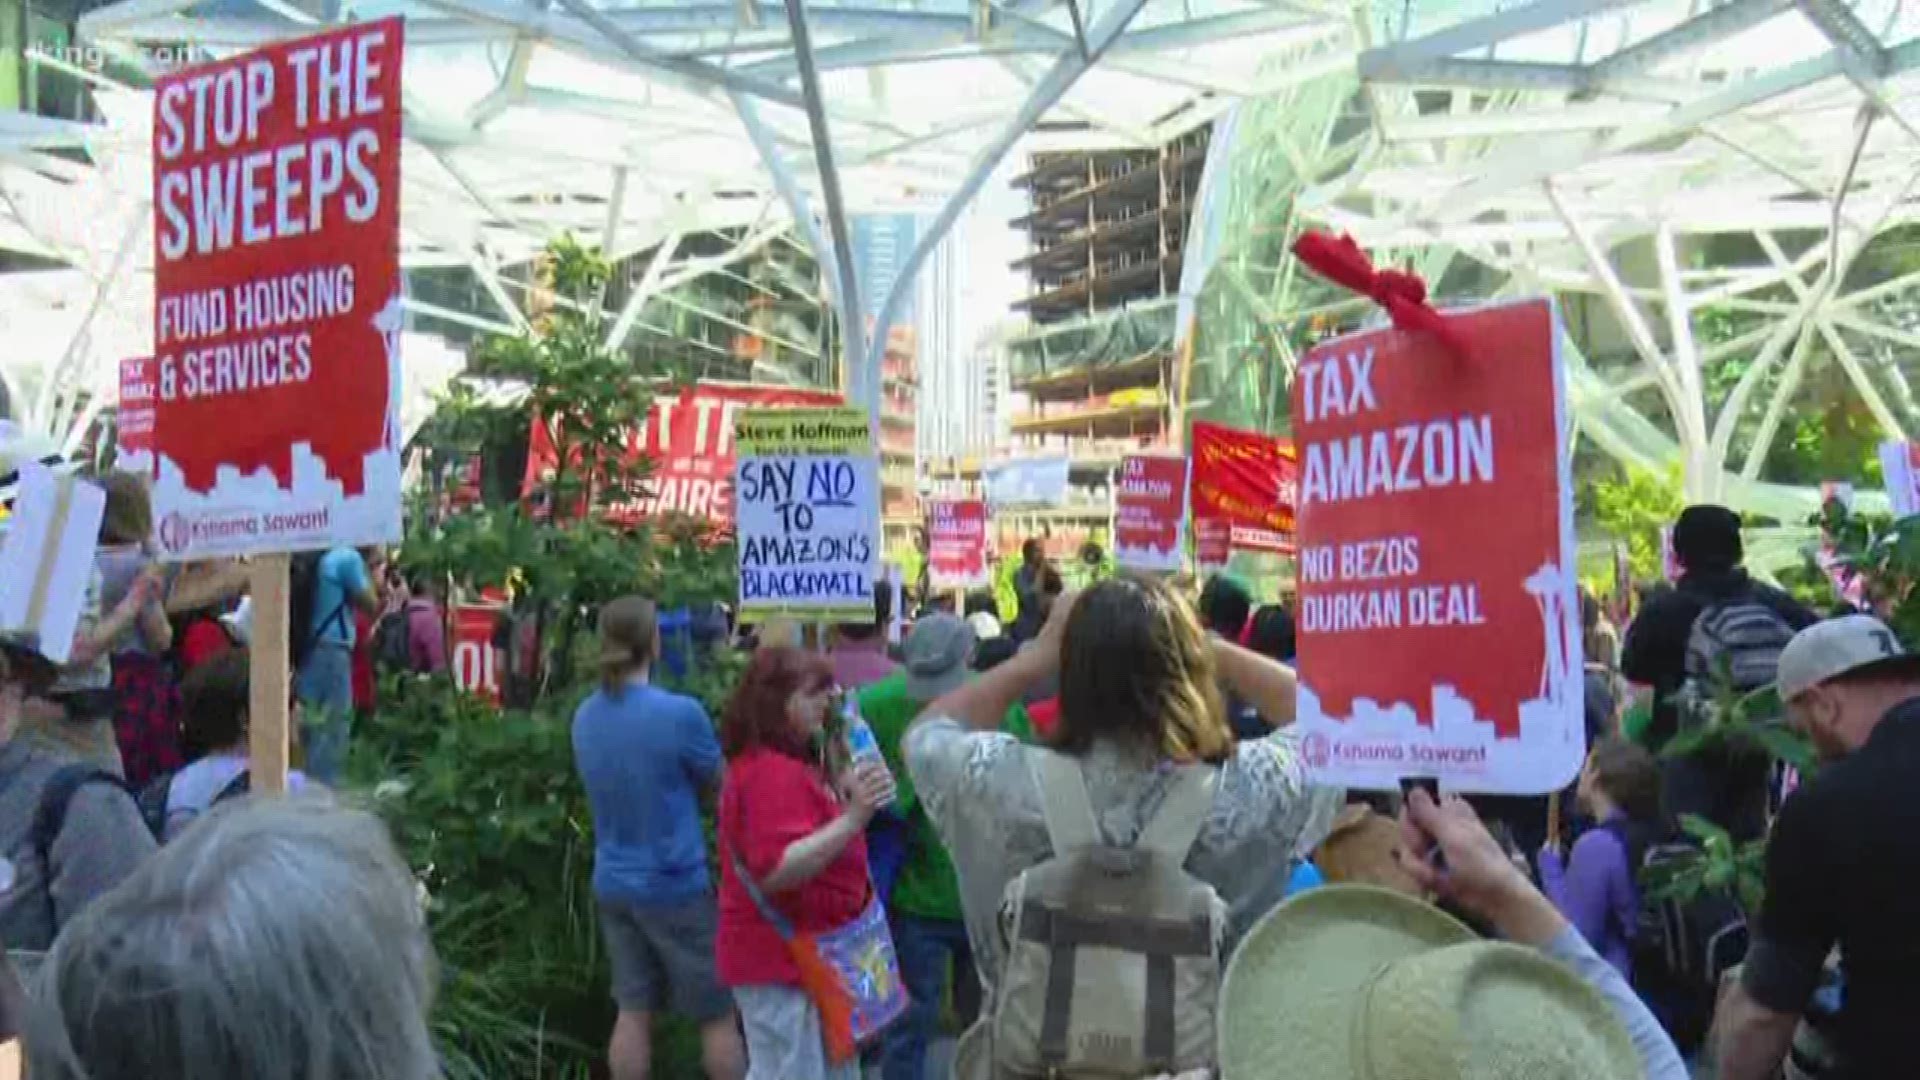 Supporters of the head tax on big business marched to the Amazon campus Saturday. Amazon has been at the center of the controversy, after it paused two major building projects, pending the outcome of the vote. KING 5's Michael Crowe reports.